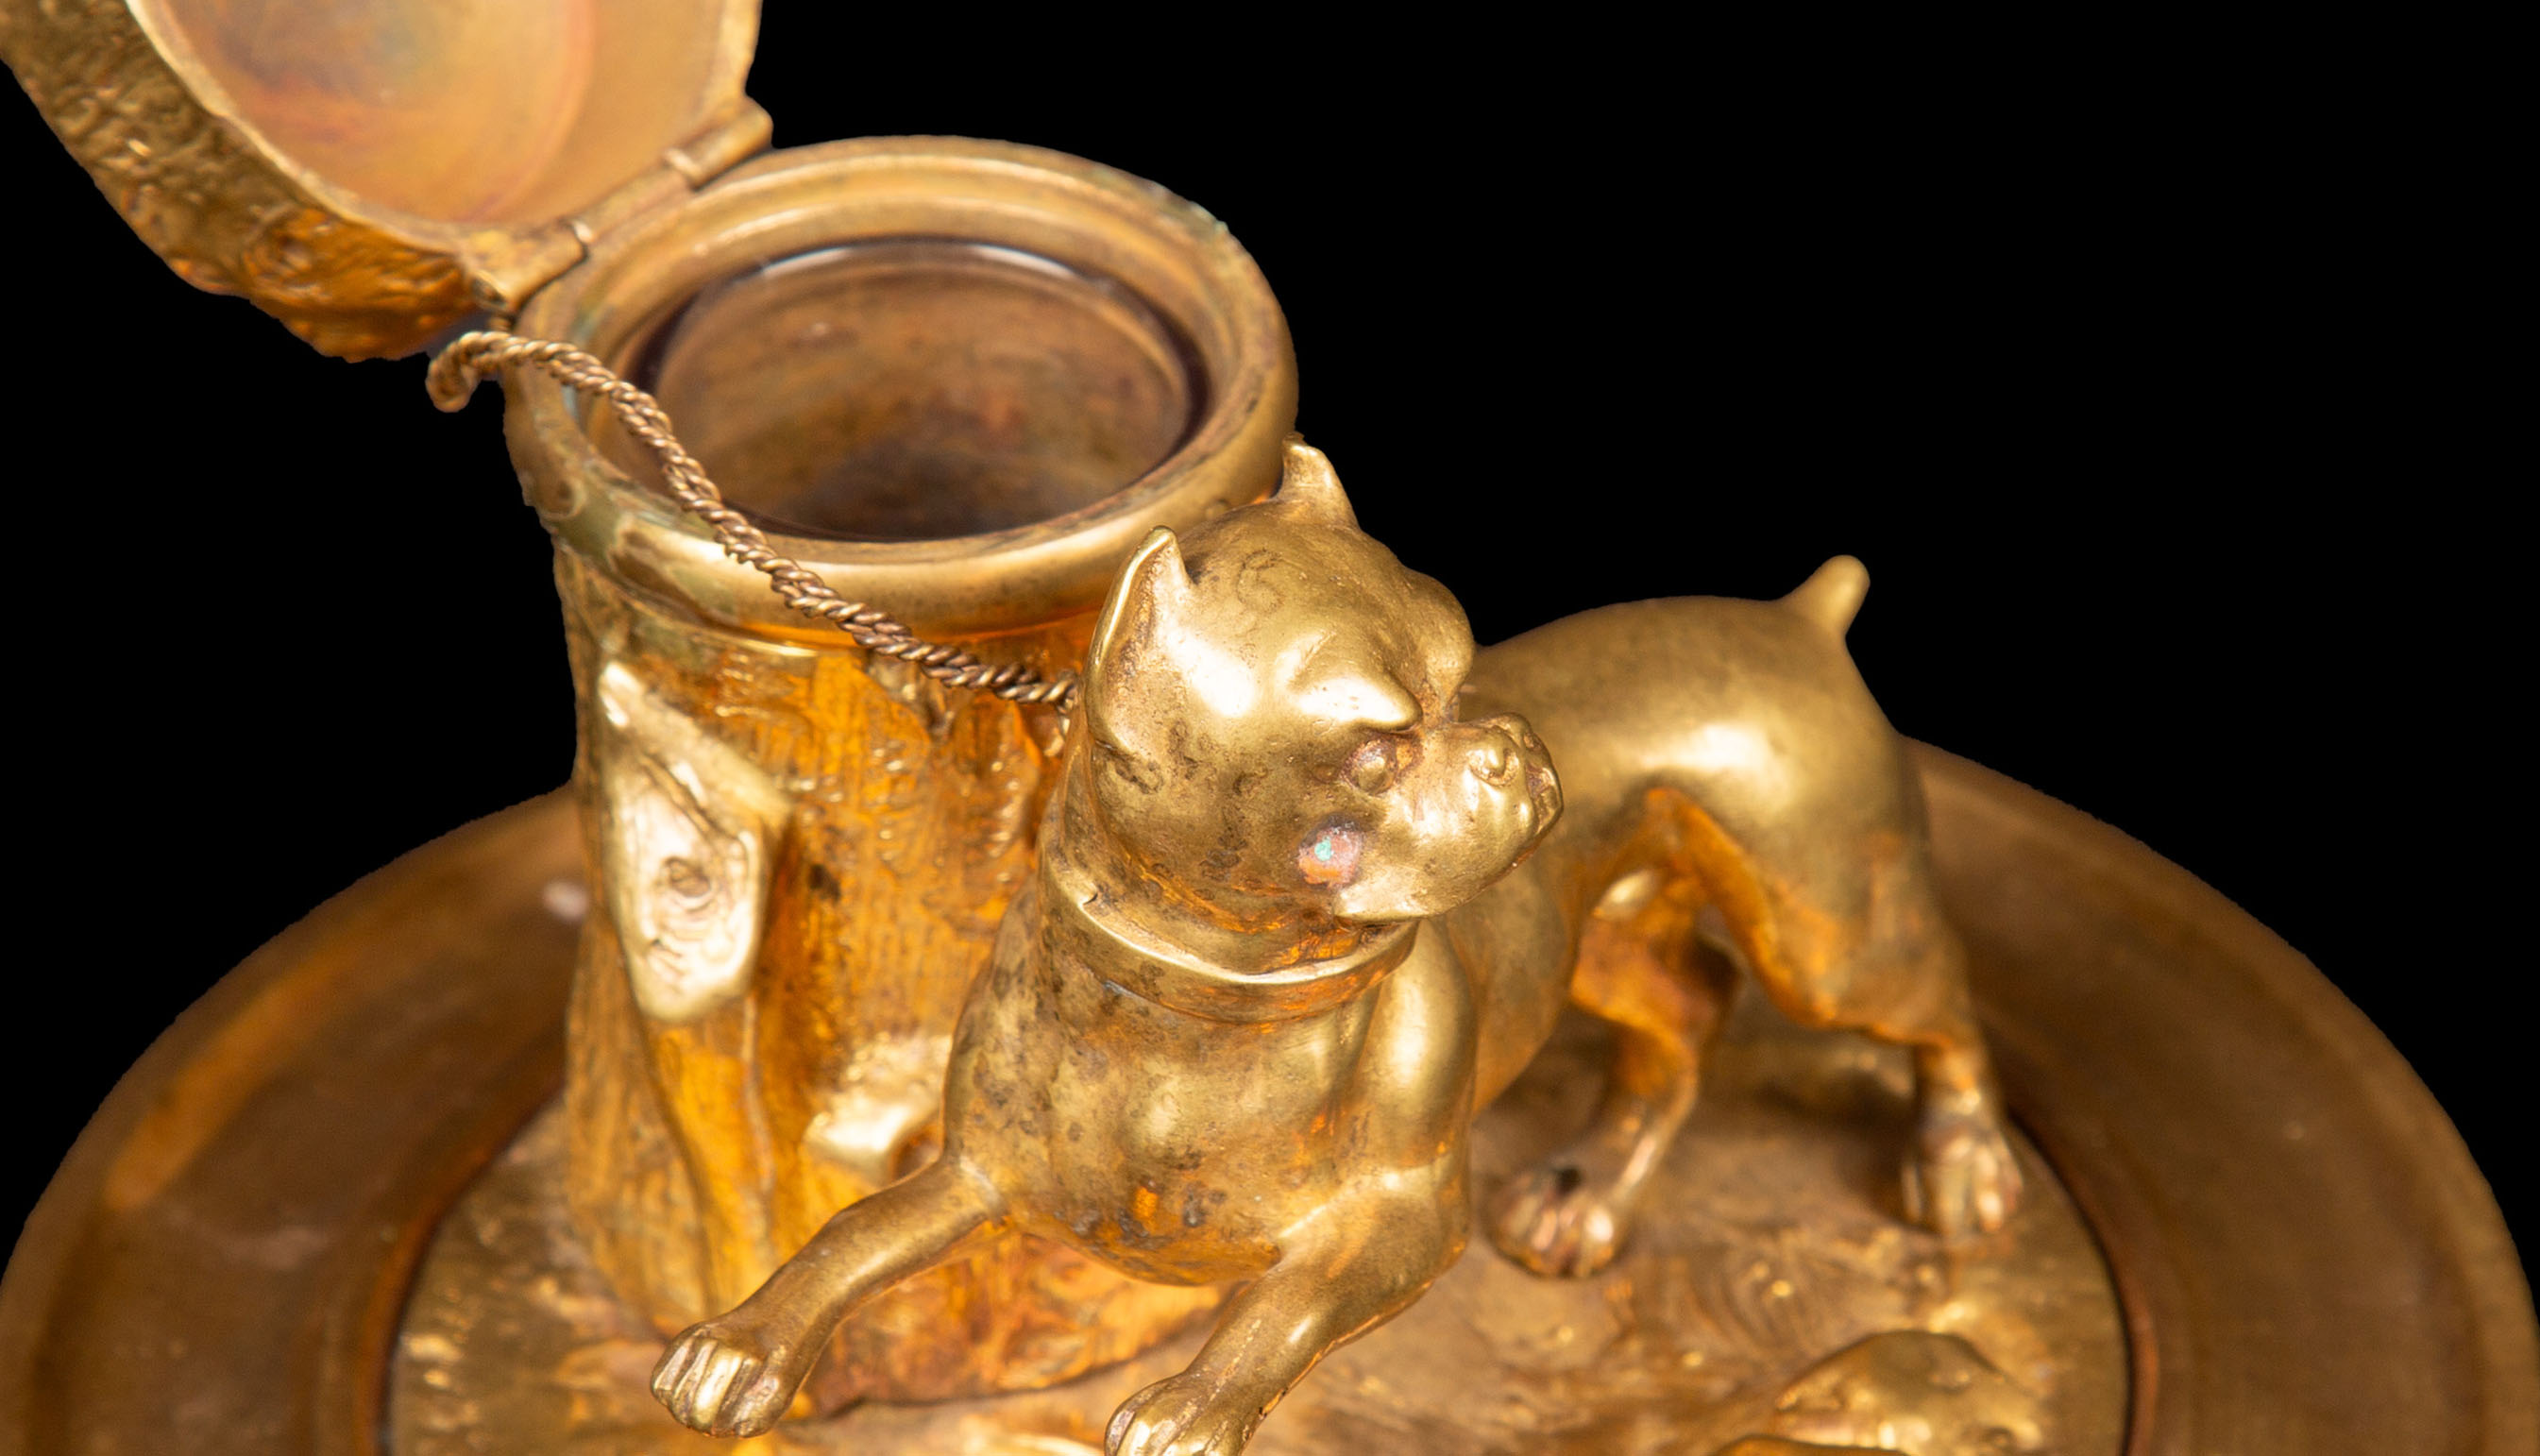 Gilded Inkwell Depicting a Pit-bull Tied to Tree Stump from the 19th Century